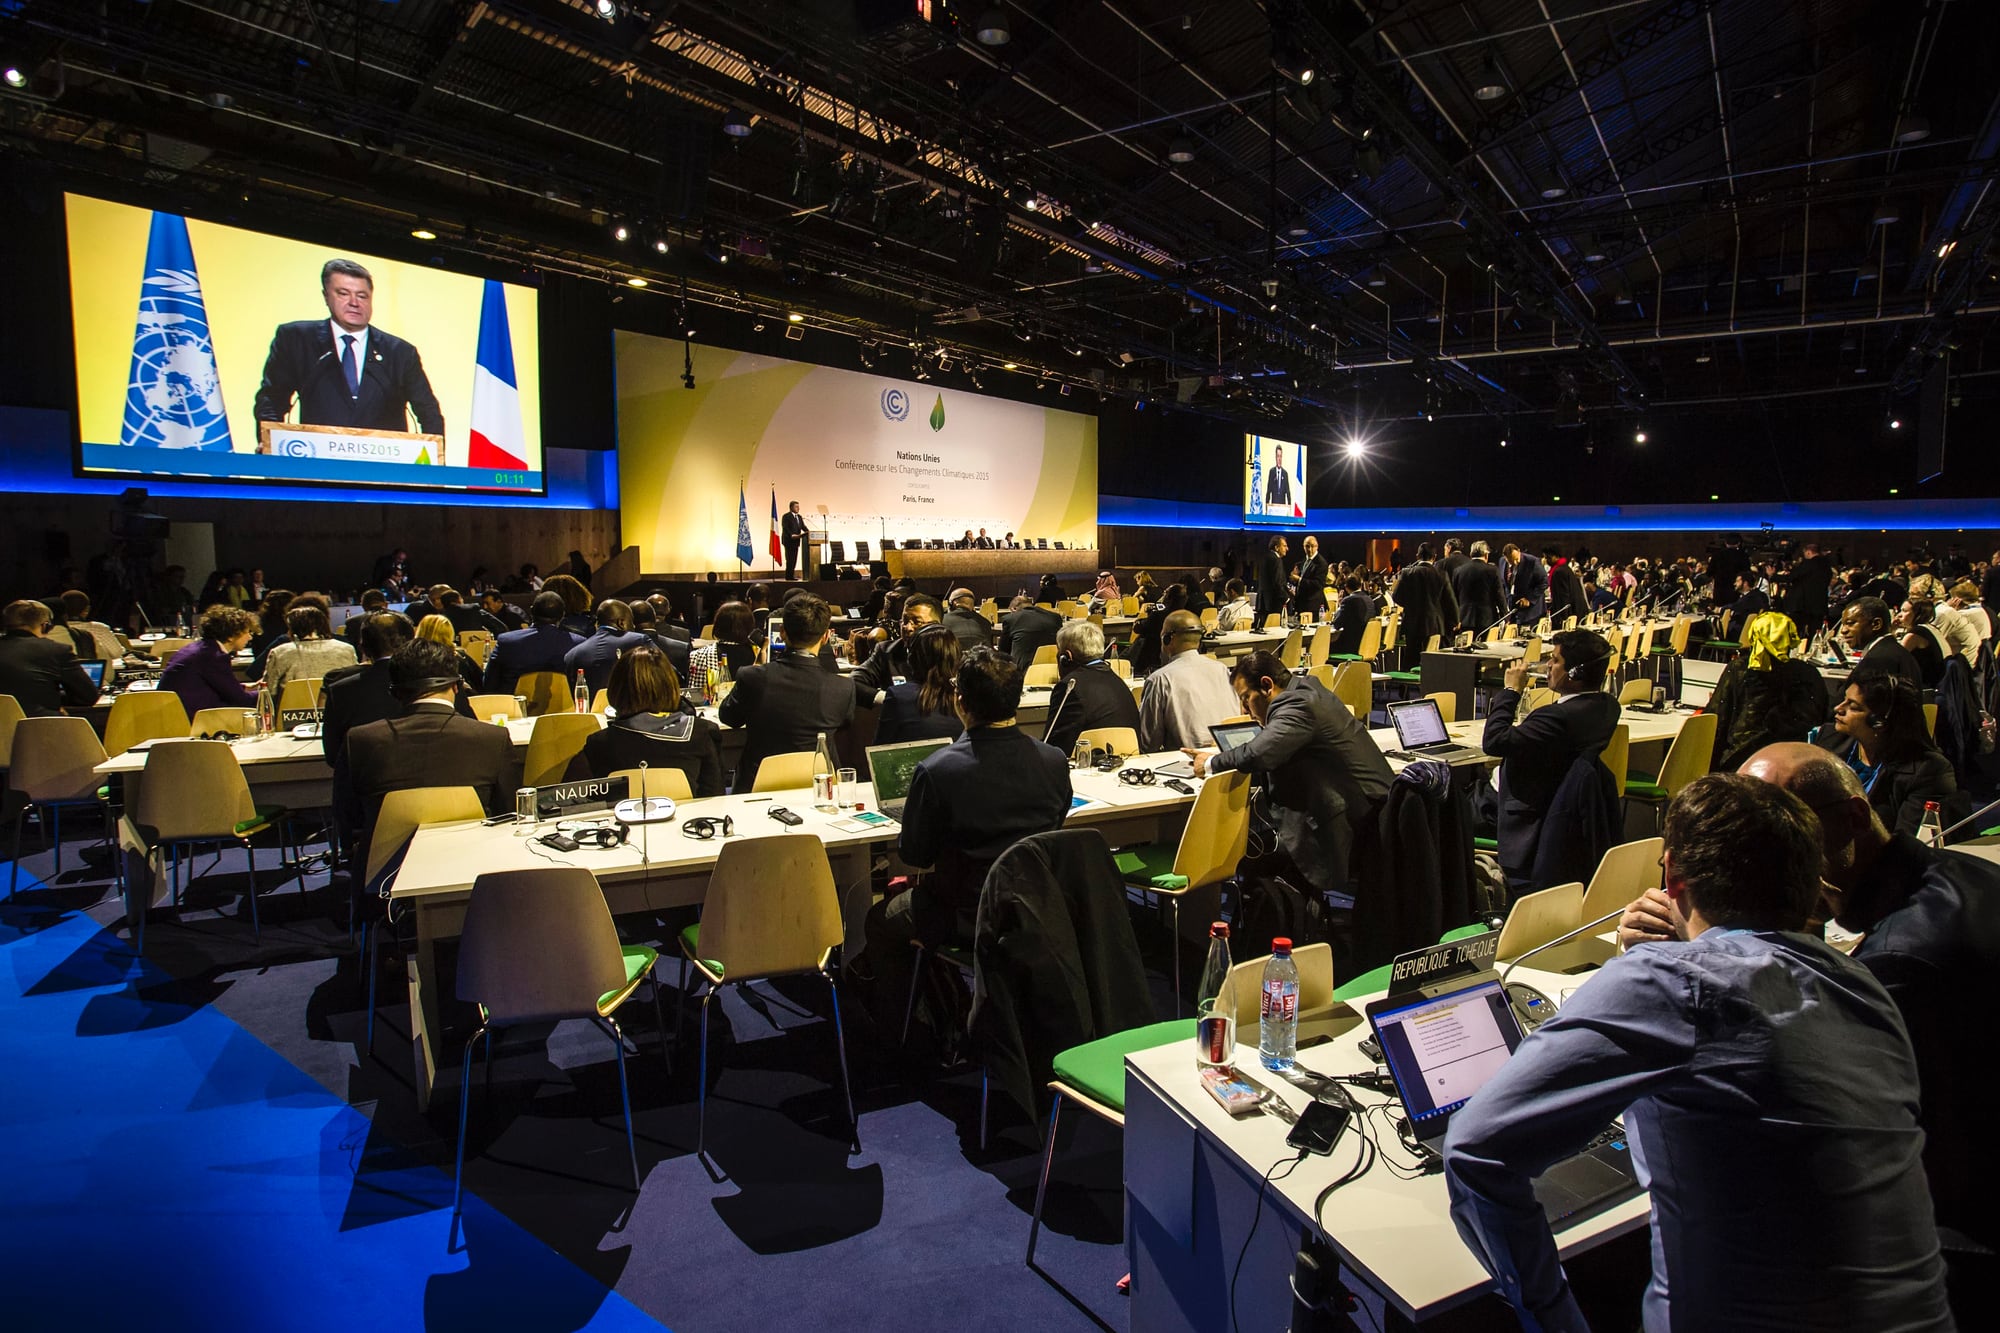 Inside the conference hall at COP 21 in Paris.